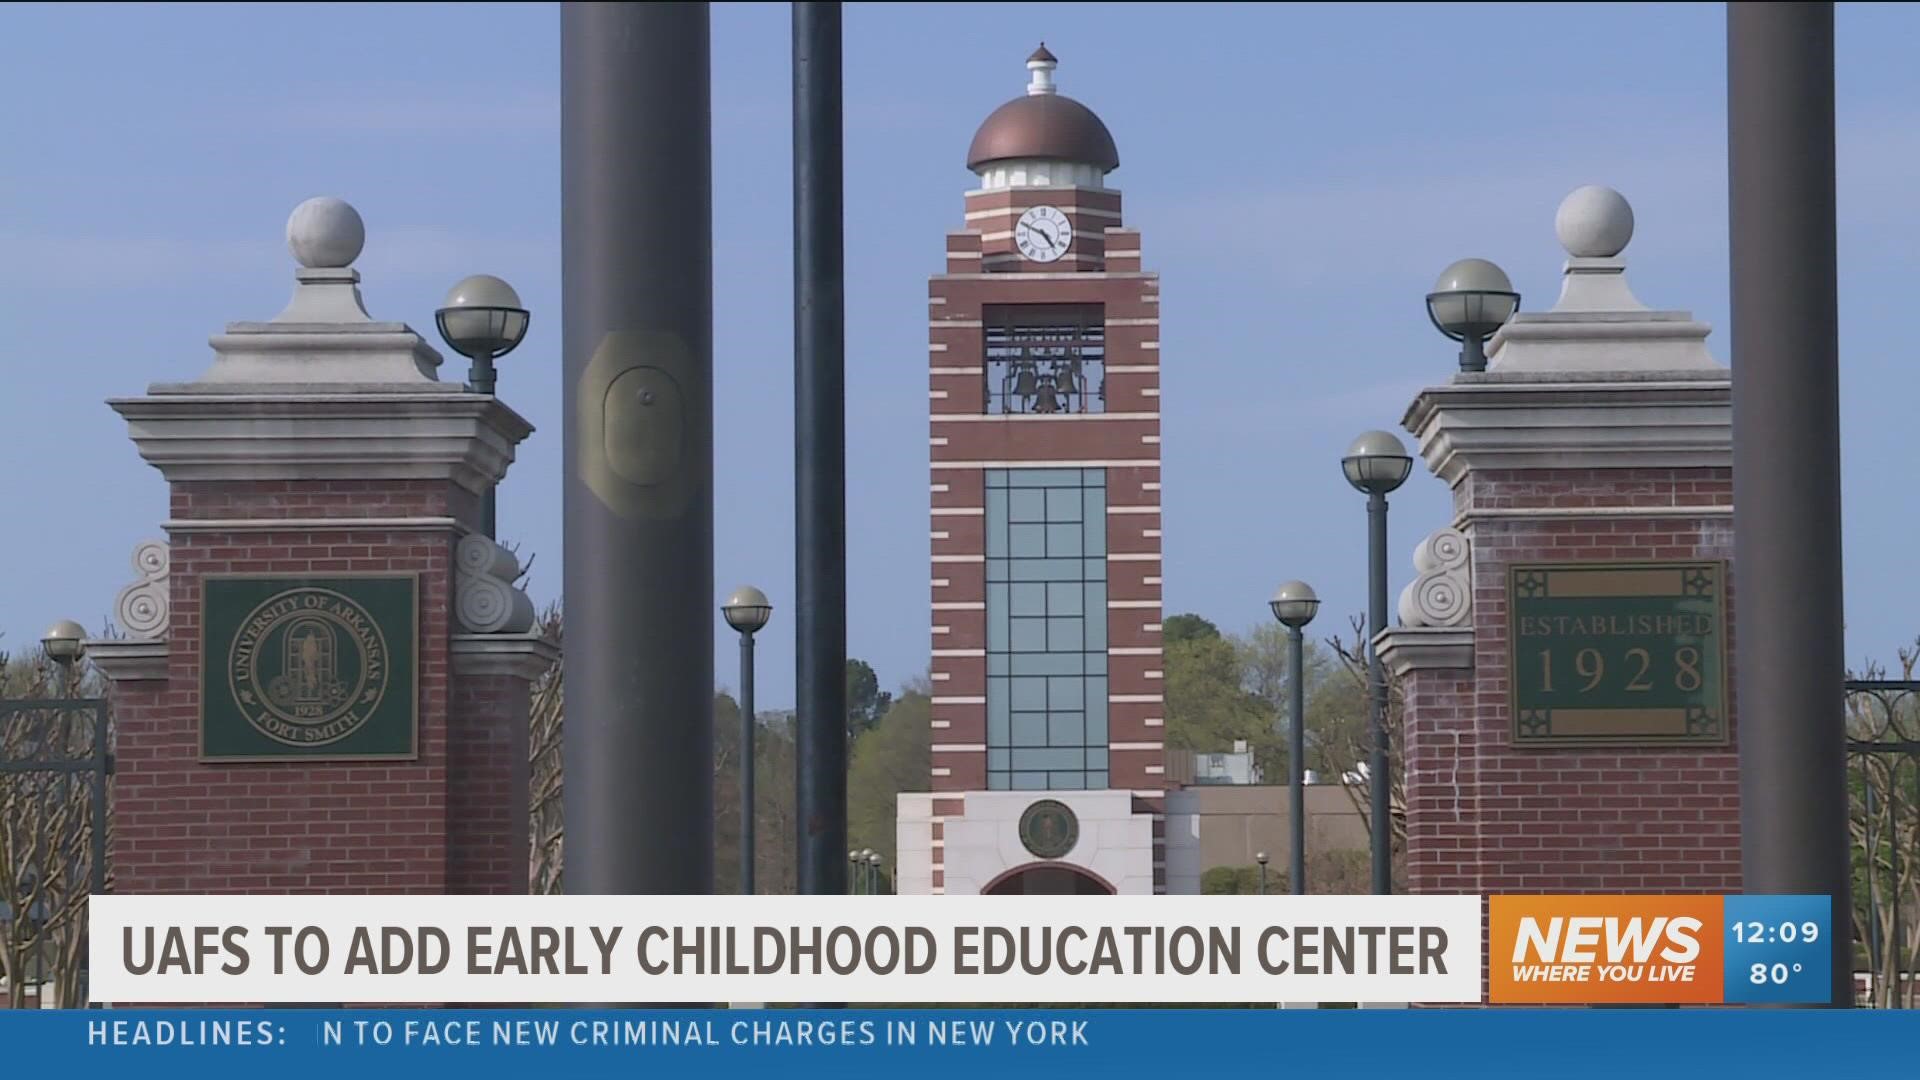 In the spring of 2021, UAFS proposed a partnership with the Arkansas Division of Child Care and Early Childhood Education to provide child care services.